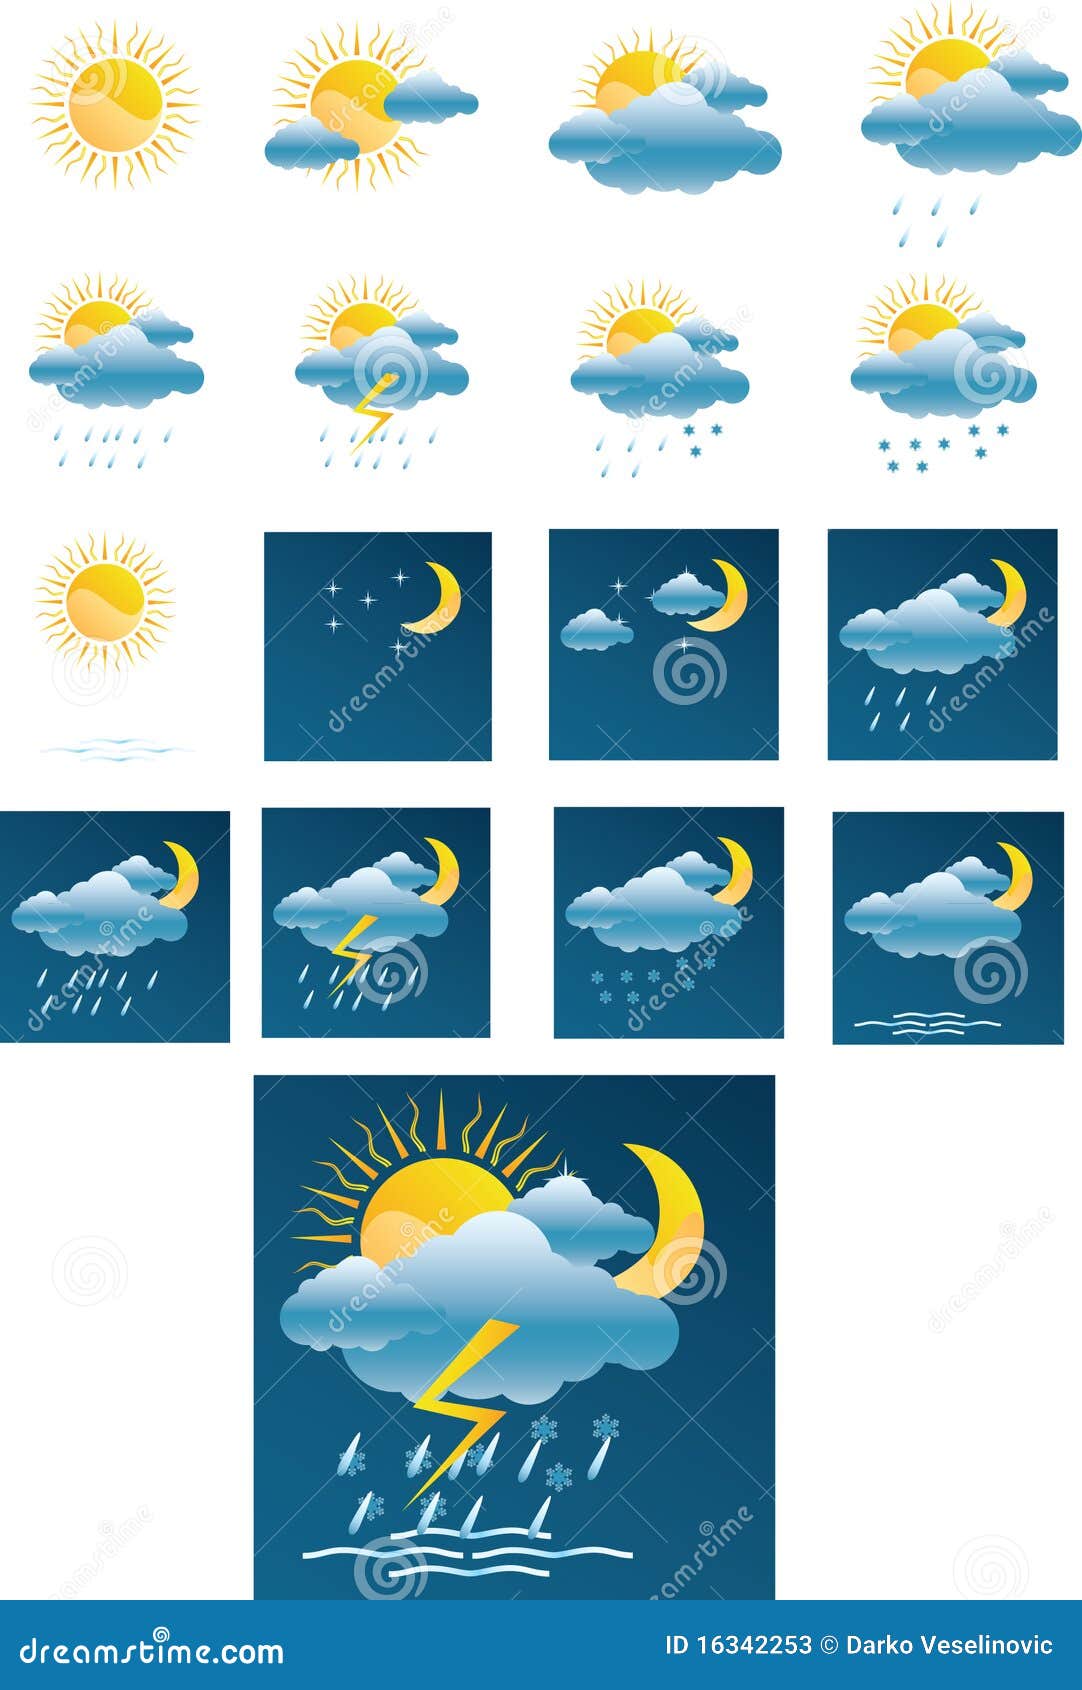  weather forecast icons + all separate